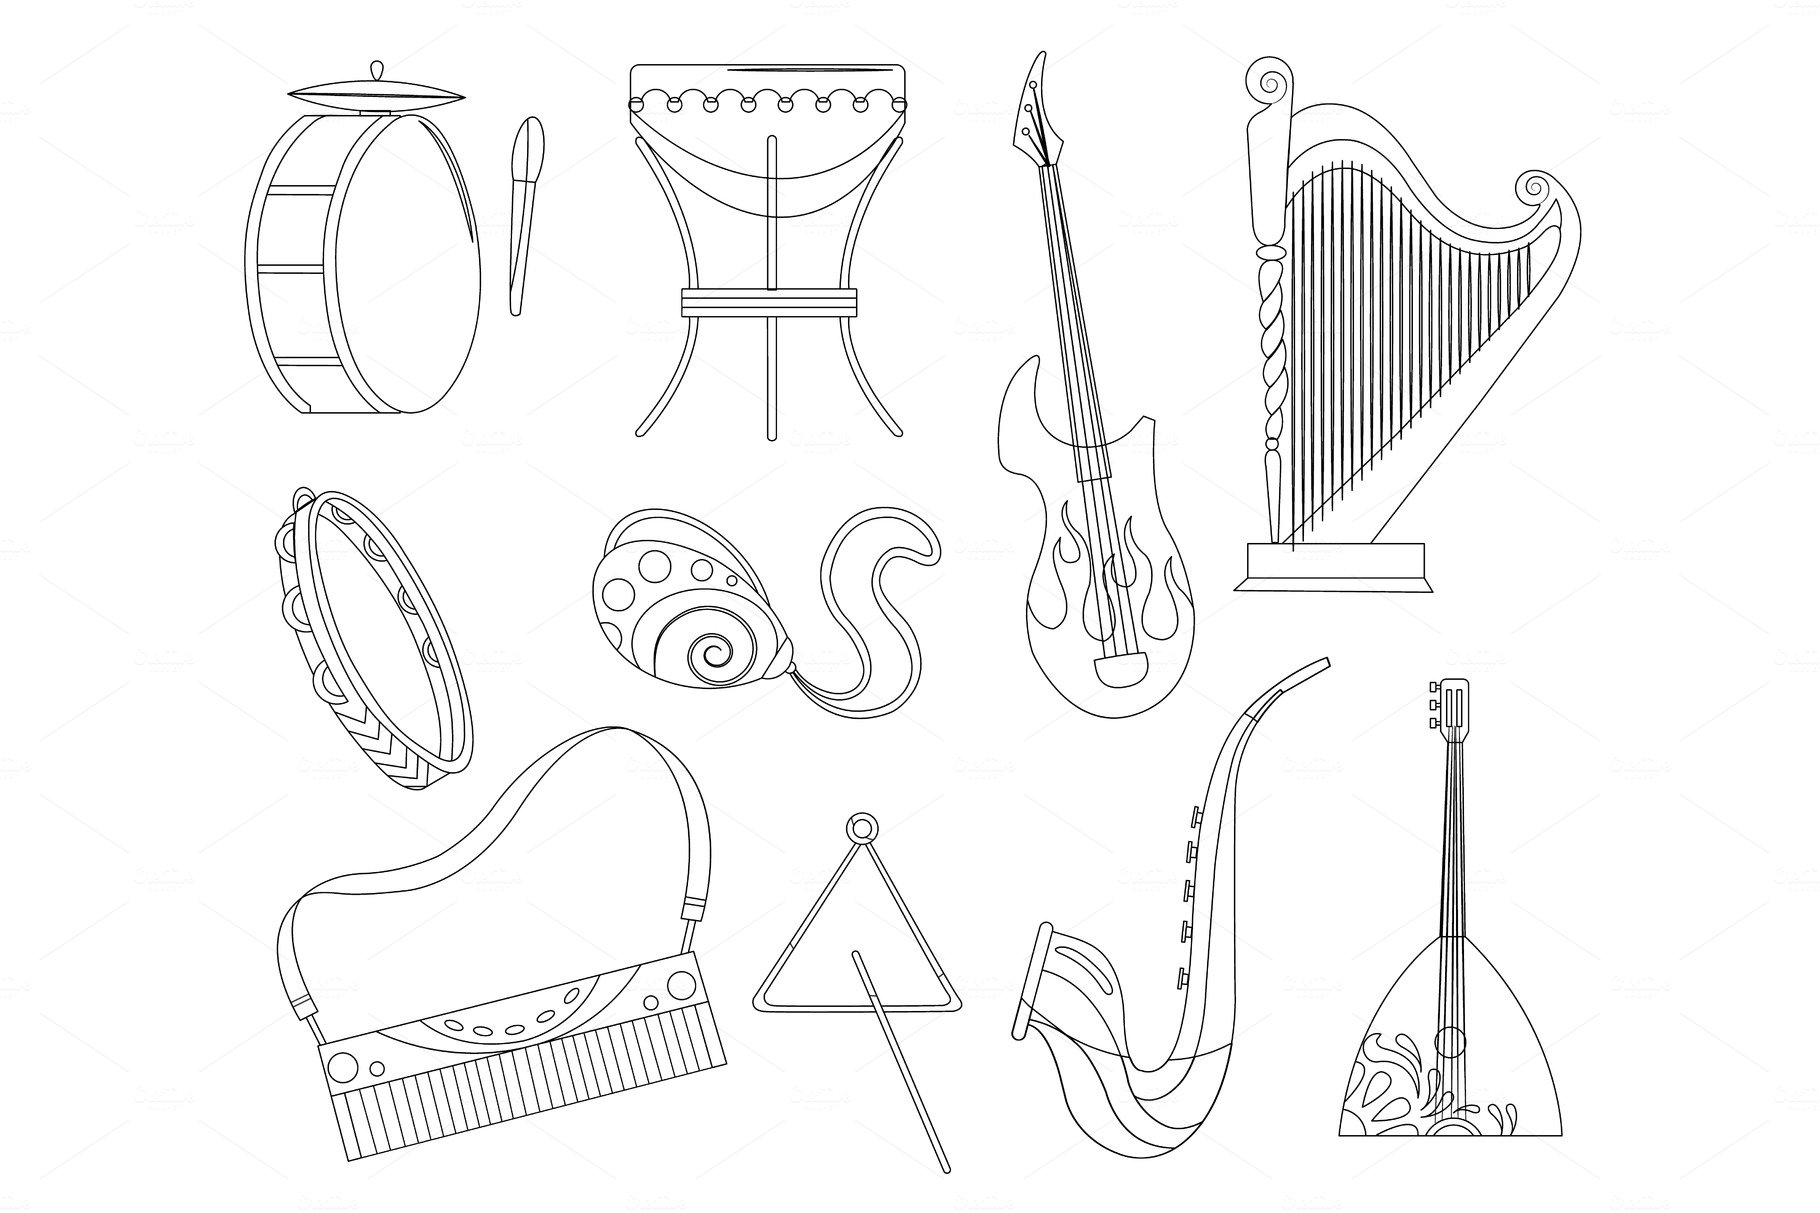 Easy musical instruments drawing|Learn how to draw  Drum,Maracas,Guitar,Triangle,Banjo, Trumpet - YouTube